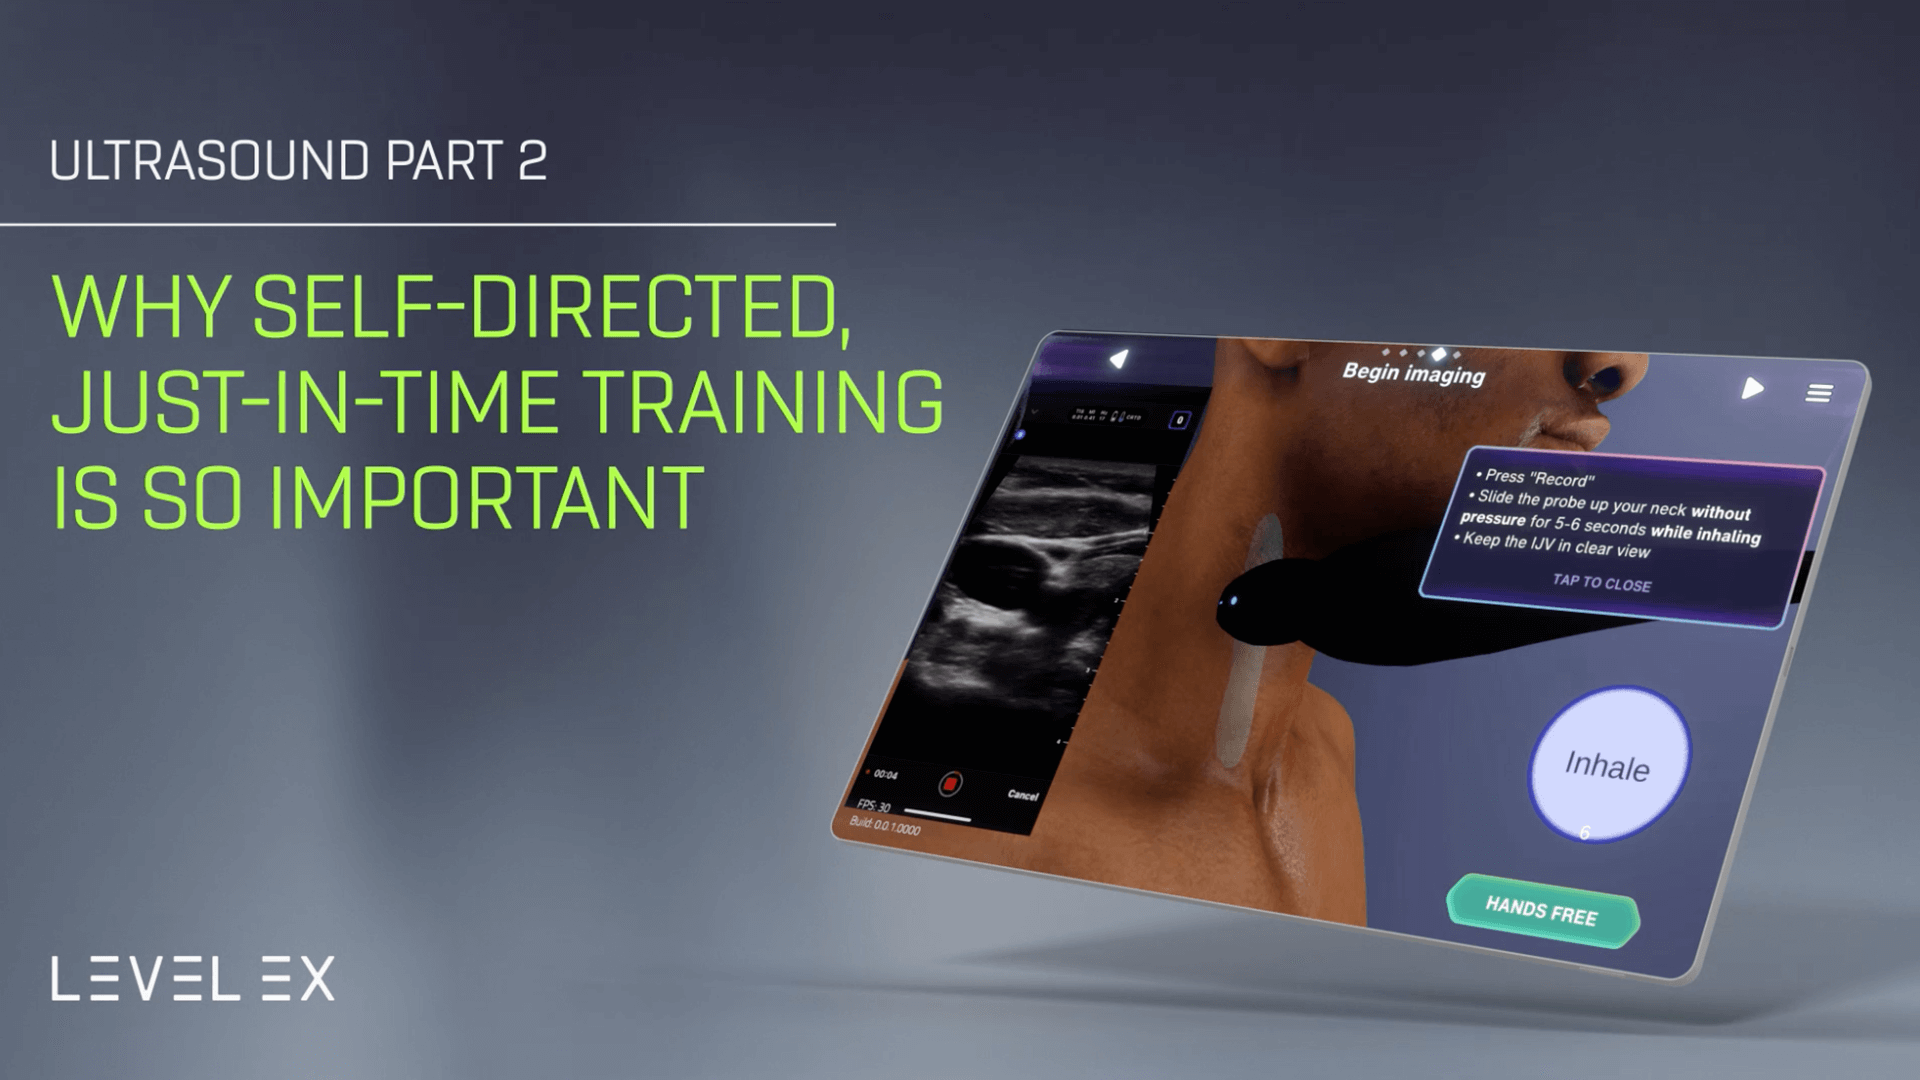 Ultrasound Part 2: Why Self-directed, Just-in-Time Training is So Important 